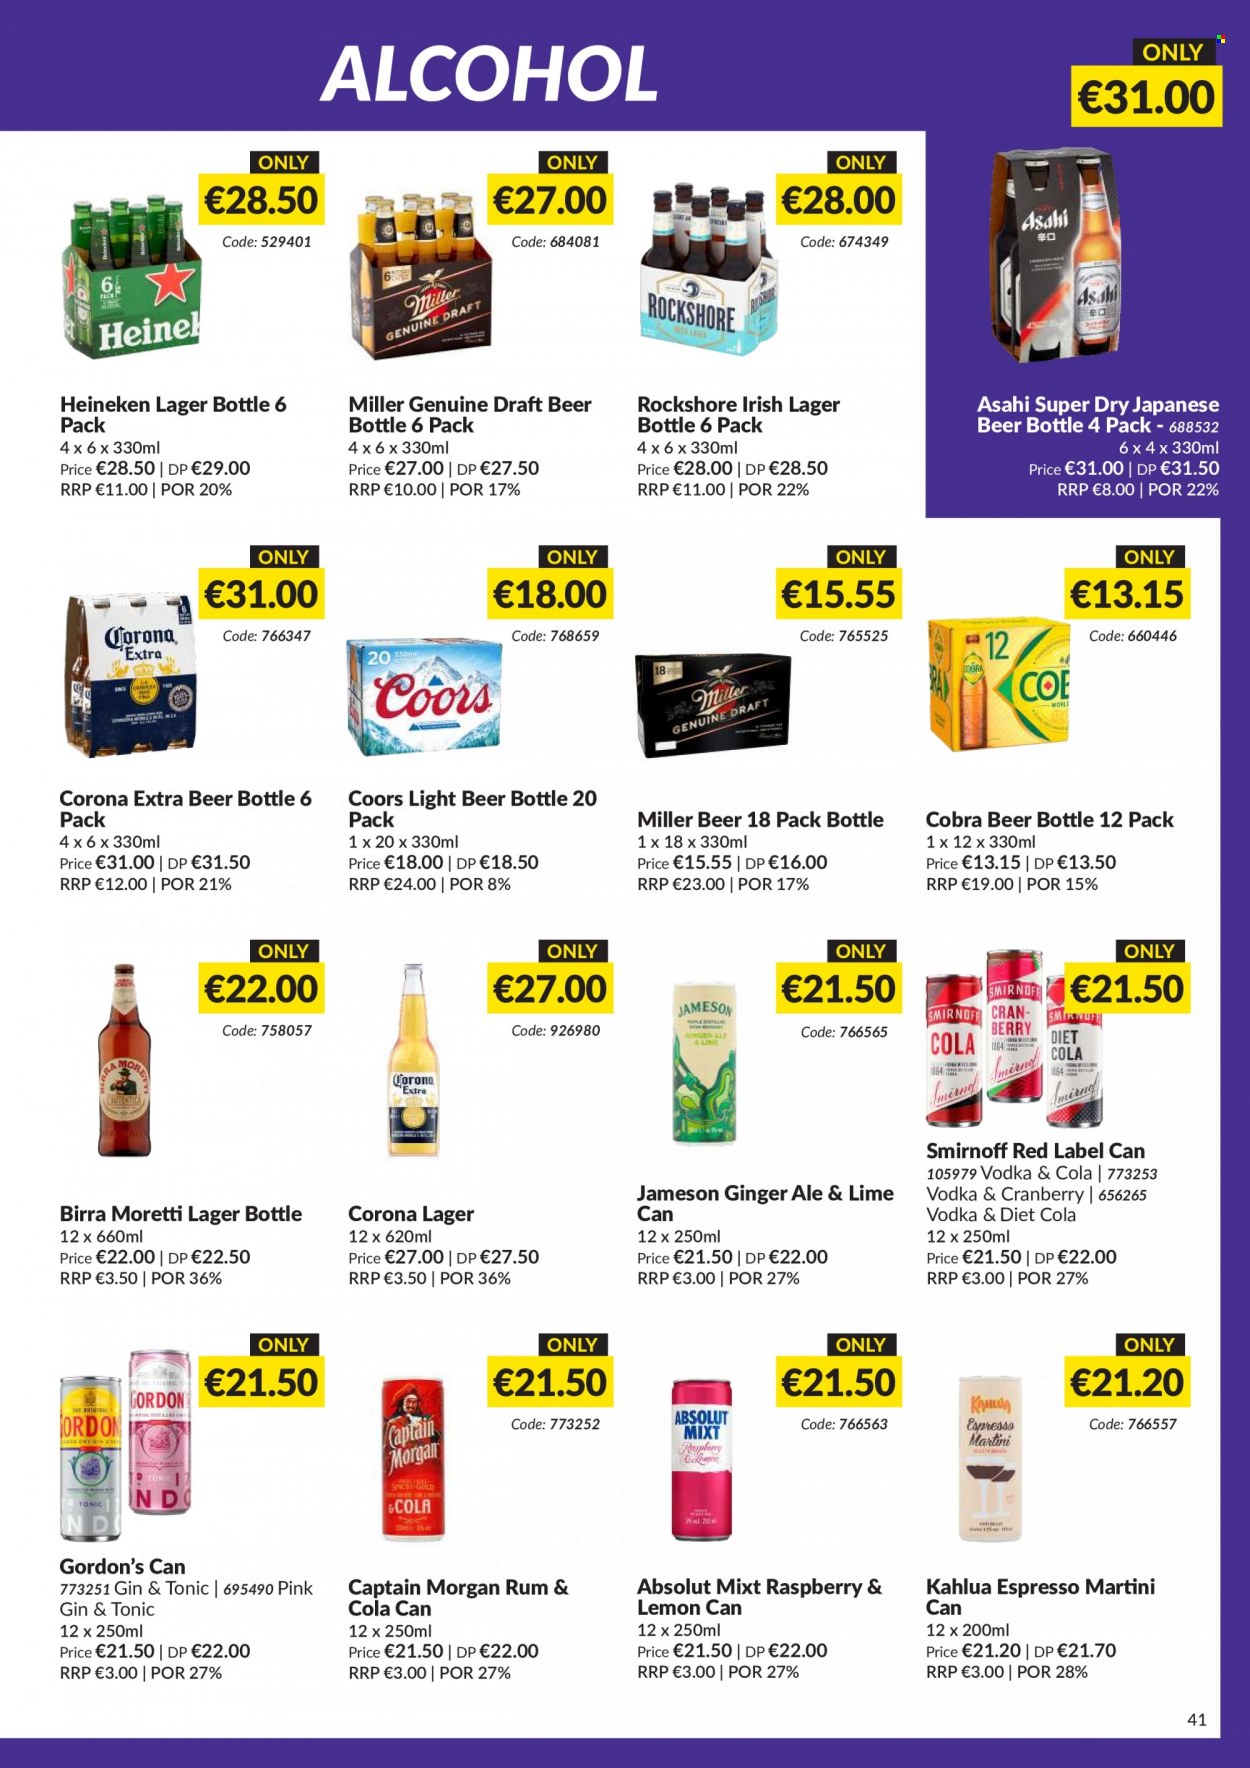 thumbnail - MUSGRAVE Market Place offer  - 31.07.2022 - 27.08.2022 - Sales products - ginger ale, Kahlúa, alcohol, Captain Morgan, rum, Smirnoff, vodka, Jameson, Gordon's, Absolut, Martini, gin & tonic, beer, Corona Extra, Heineken, Miller, Lager, Rockshore, Coors. Page 41.